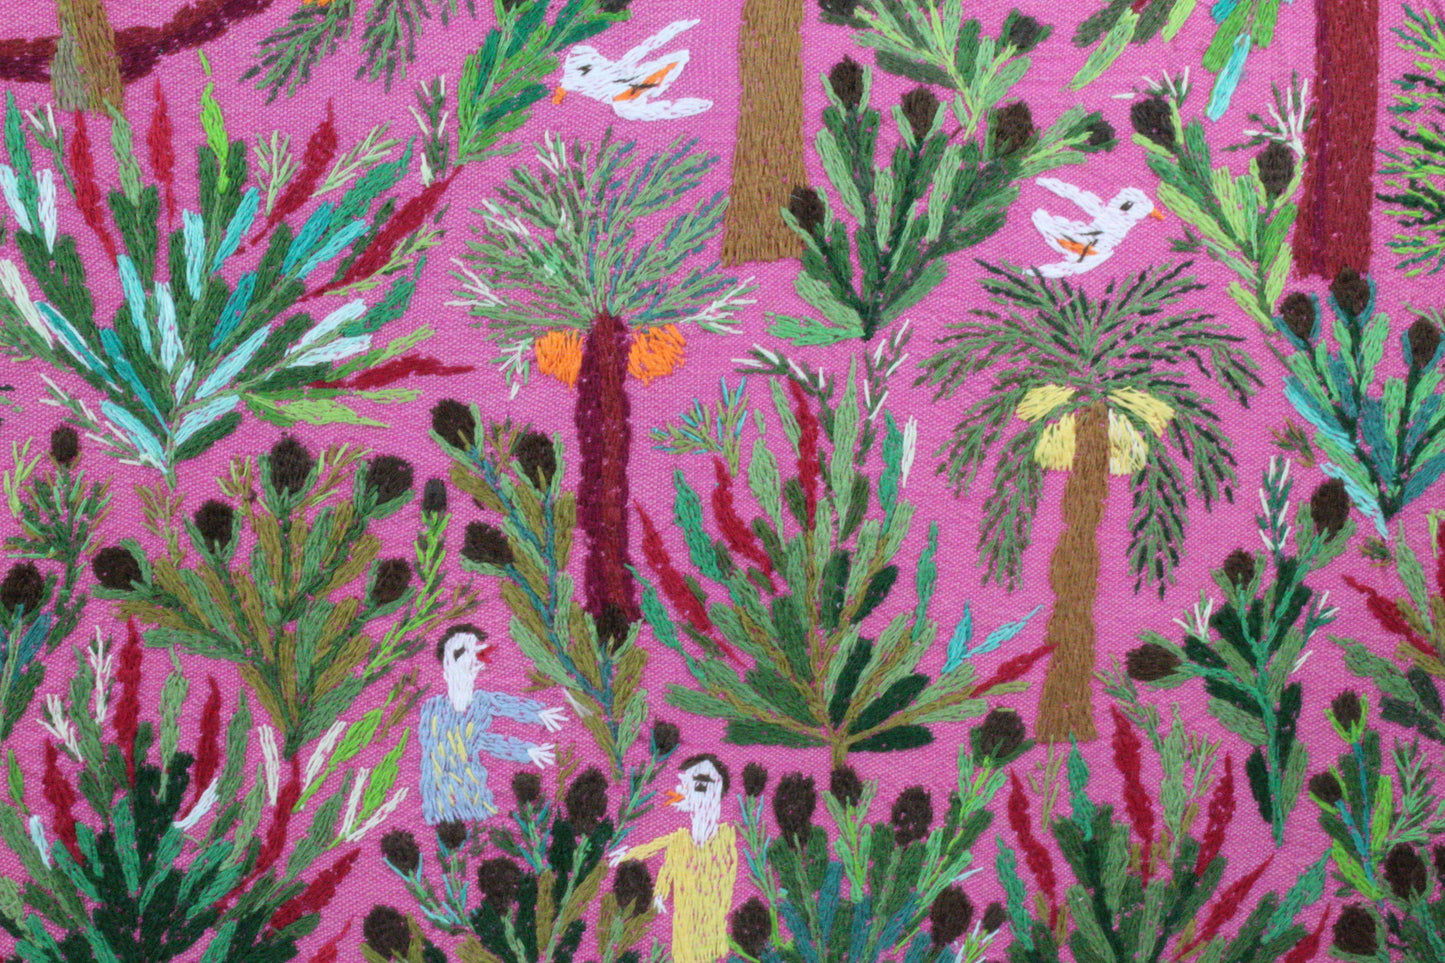 Hand Embroidered Tapestry - Eggplant Picking - Dandarah